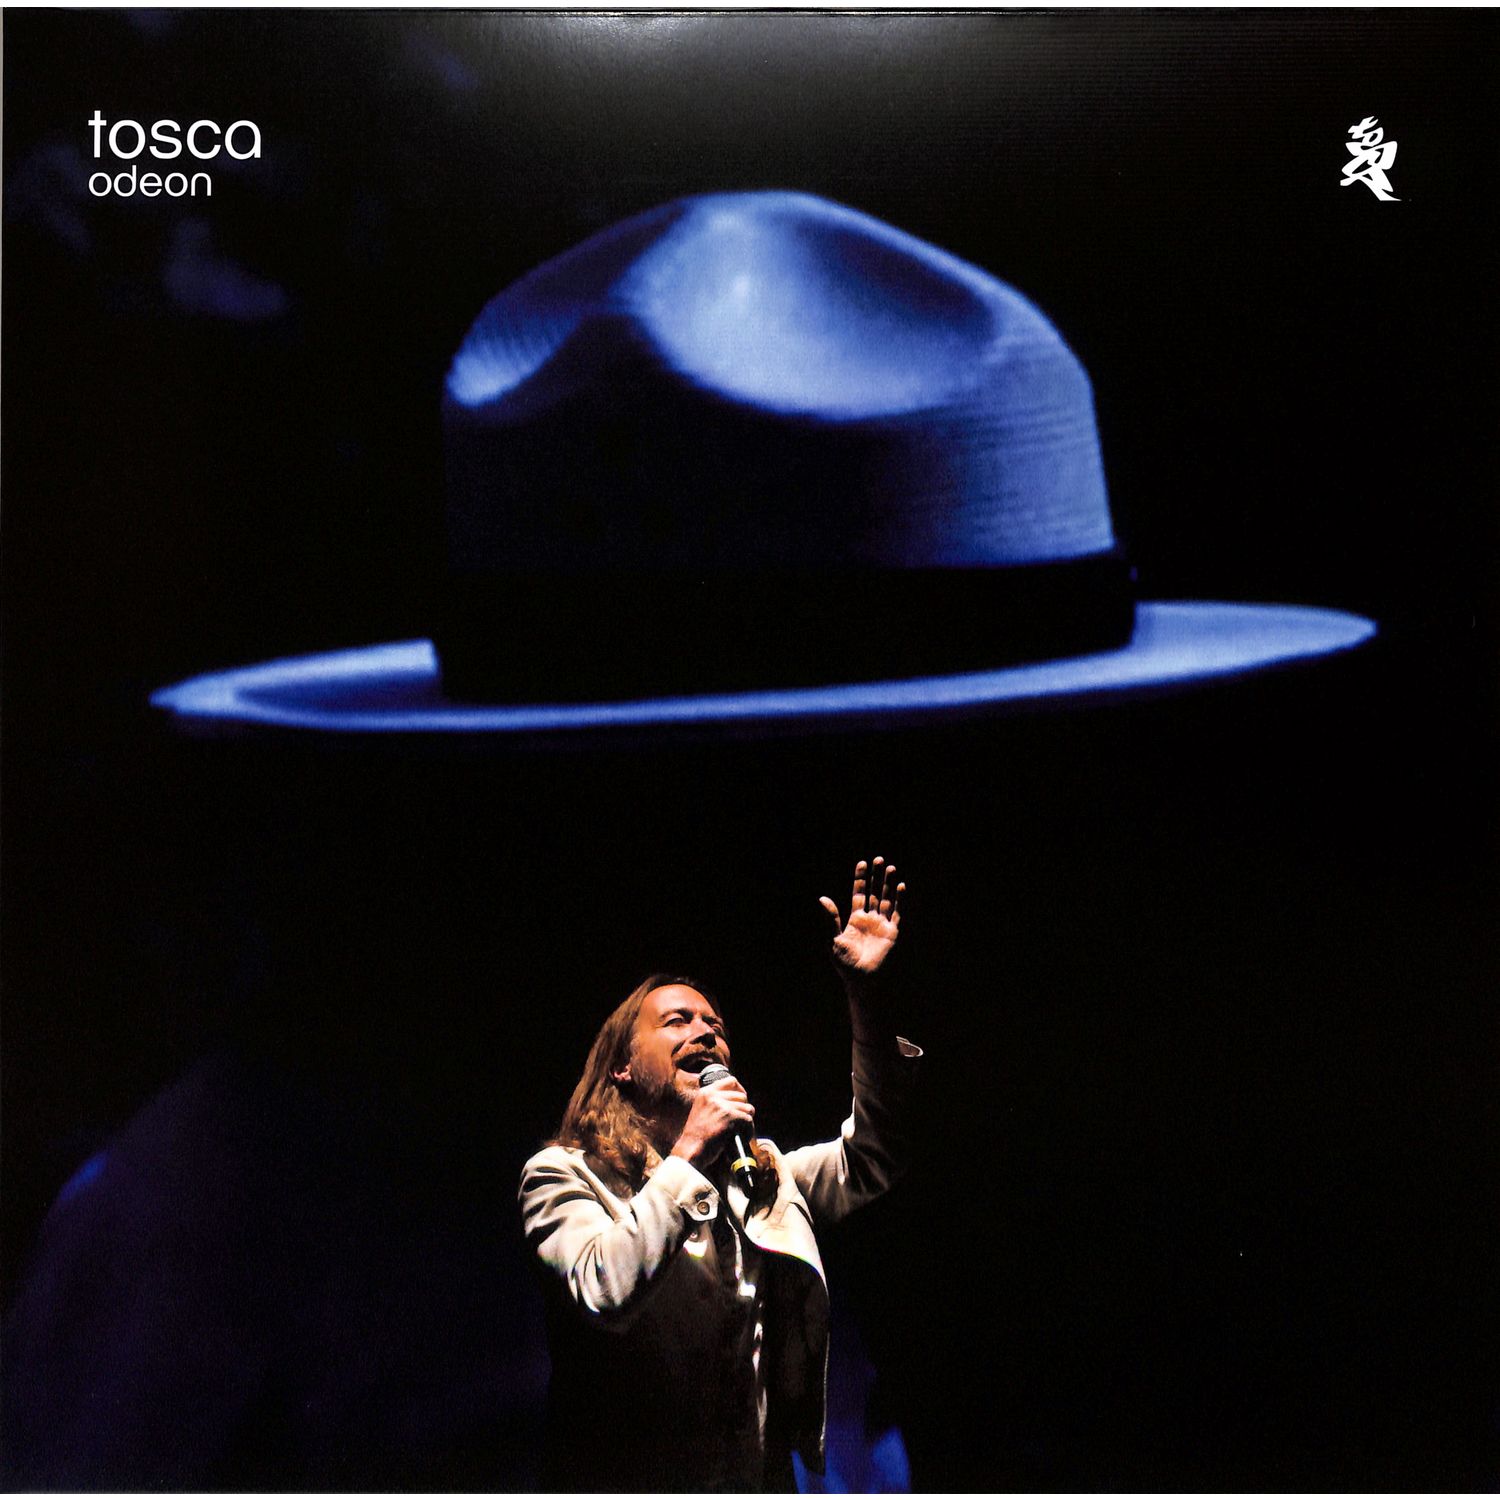 Tosca - ODEON 